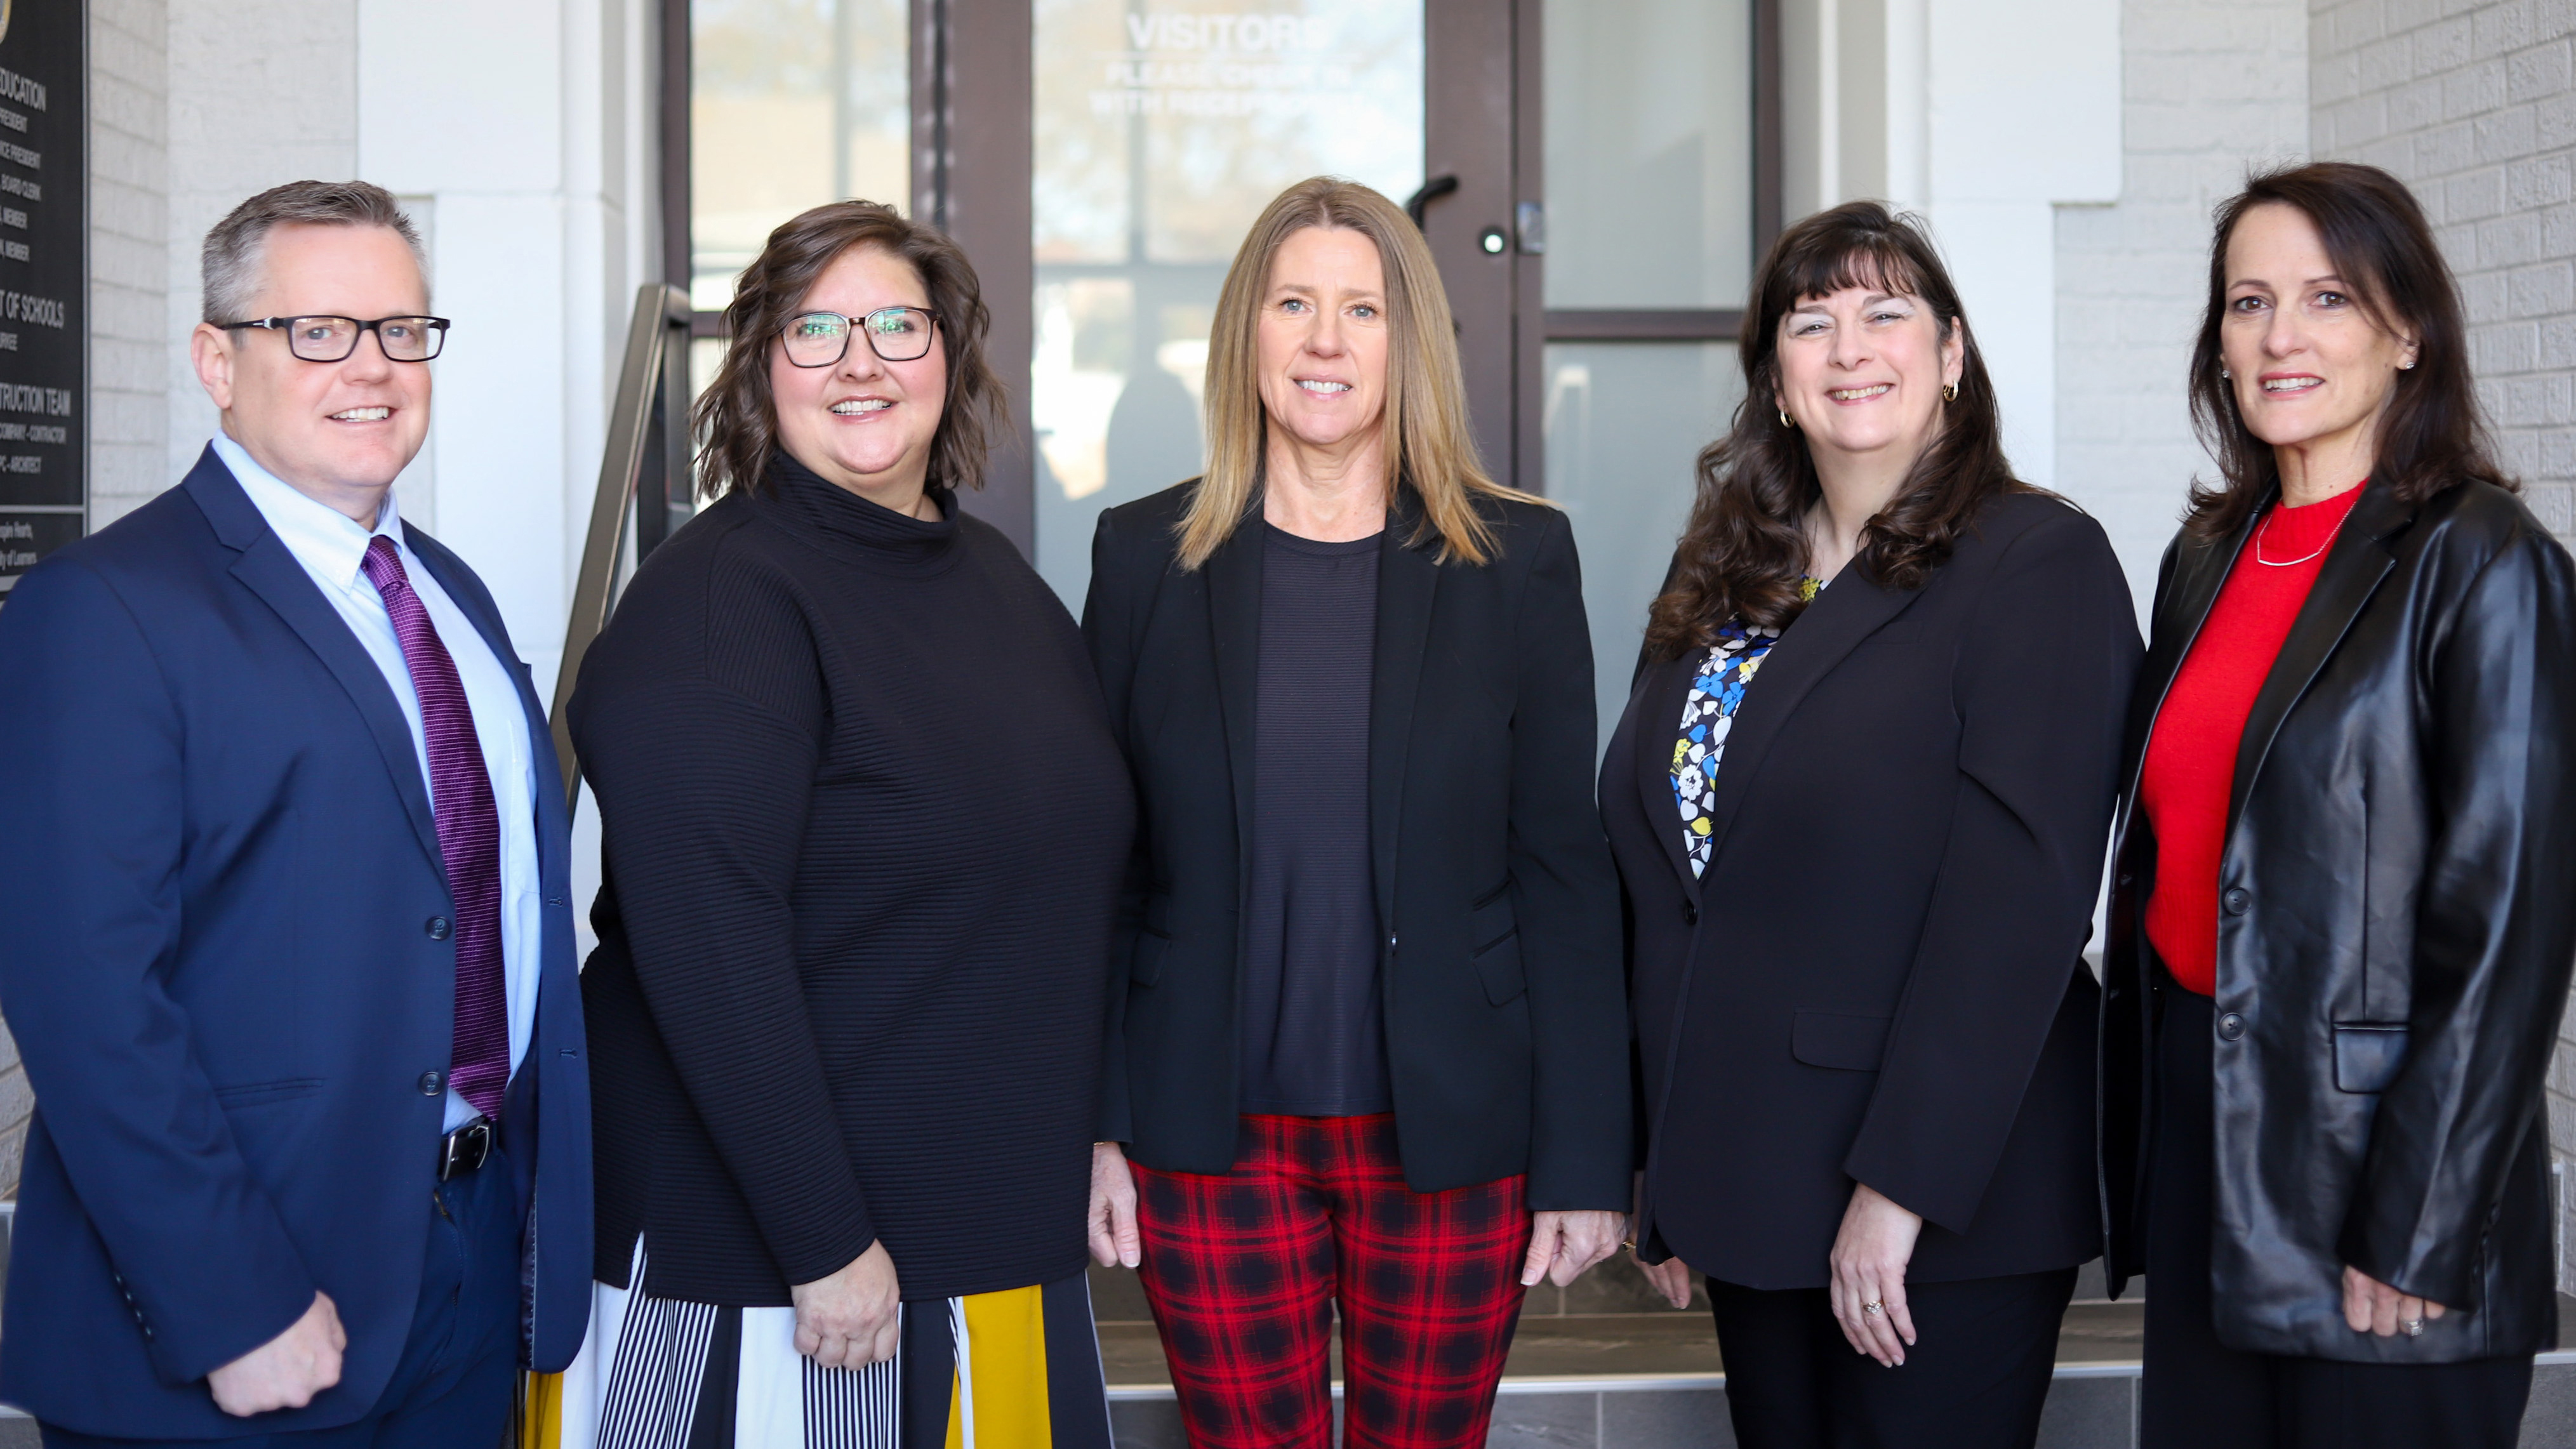 Superintendent's cabinet smiling and facing the camera. From left to right: Shawn Beard, Carrie Schlehuber, Sherry Durkee, Kristie Newby, and Kristin Arnold